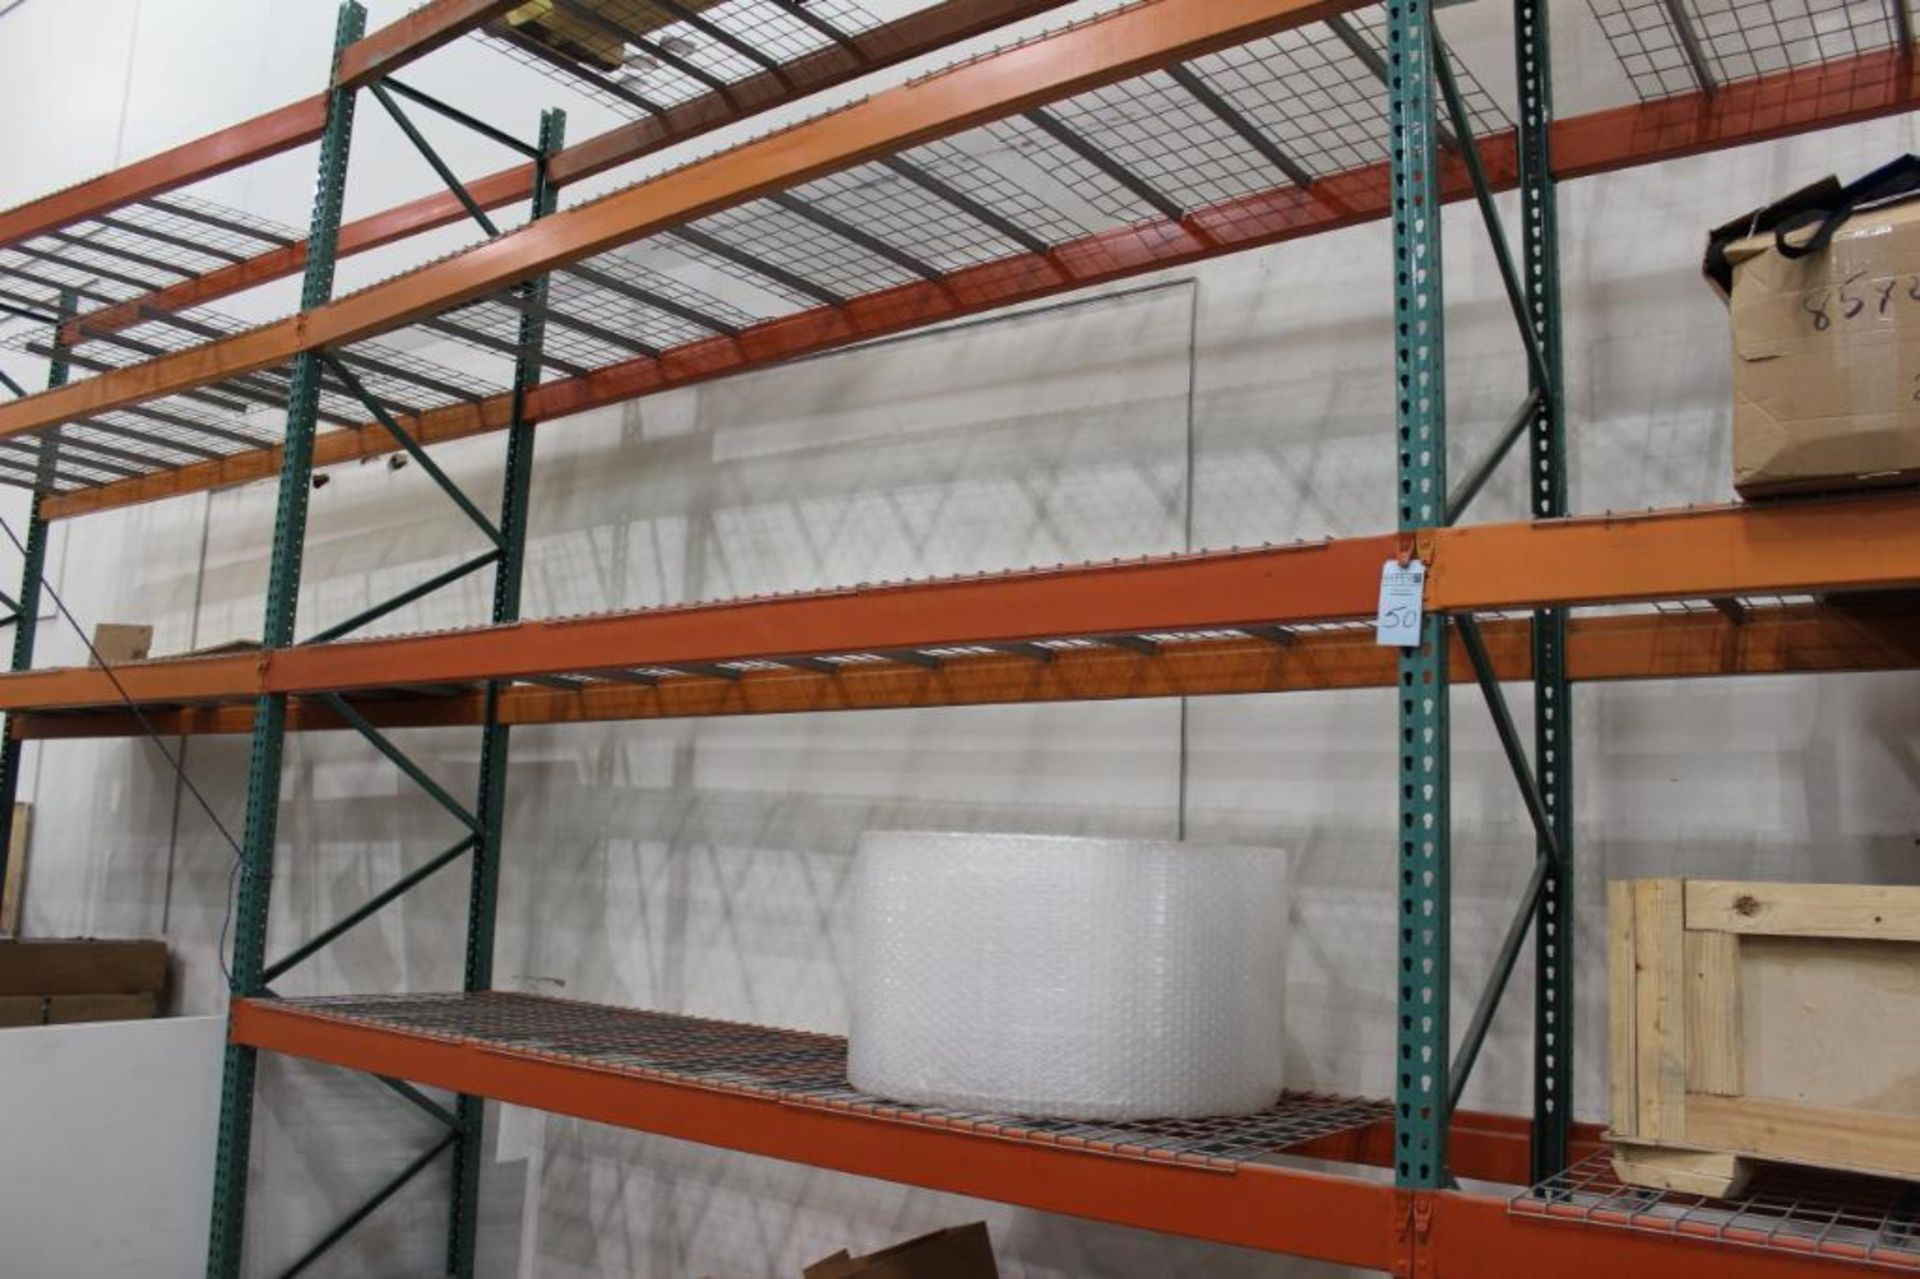 (3)-sections pallet racking 16' x 42” x 13' consisting of (24)-13' crossbars and (4)- 16'x42” uprigh